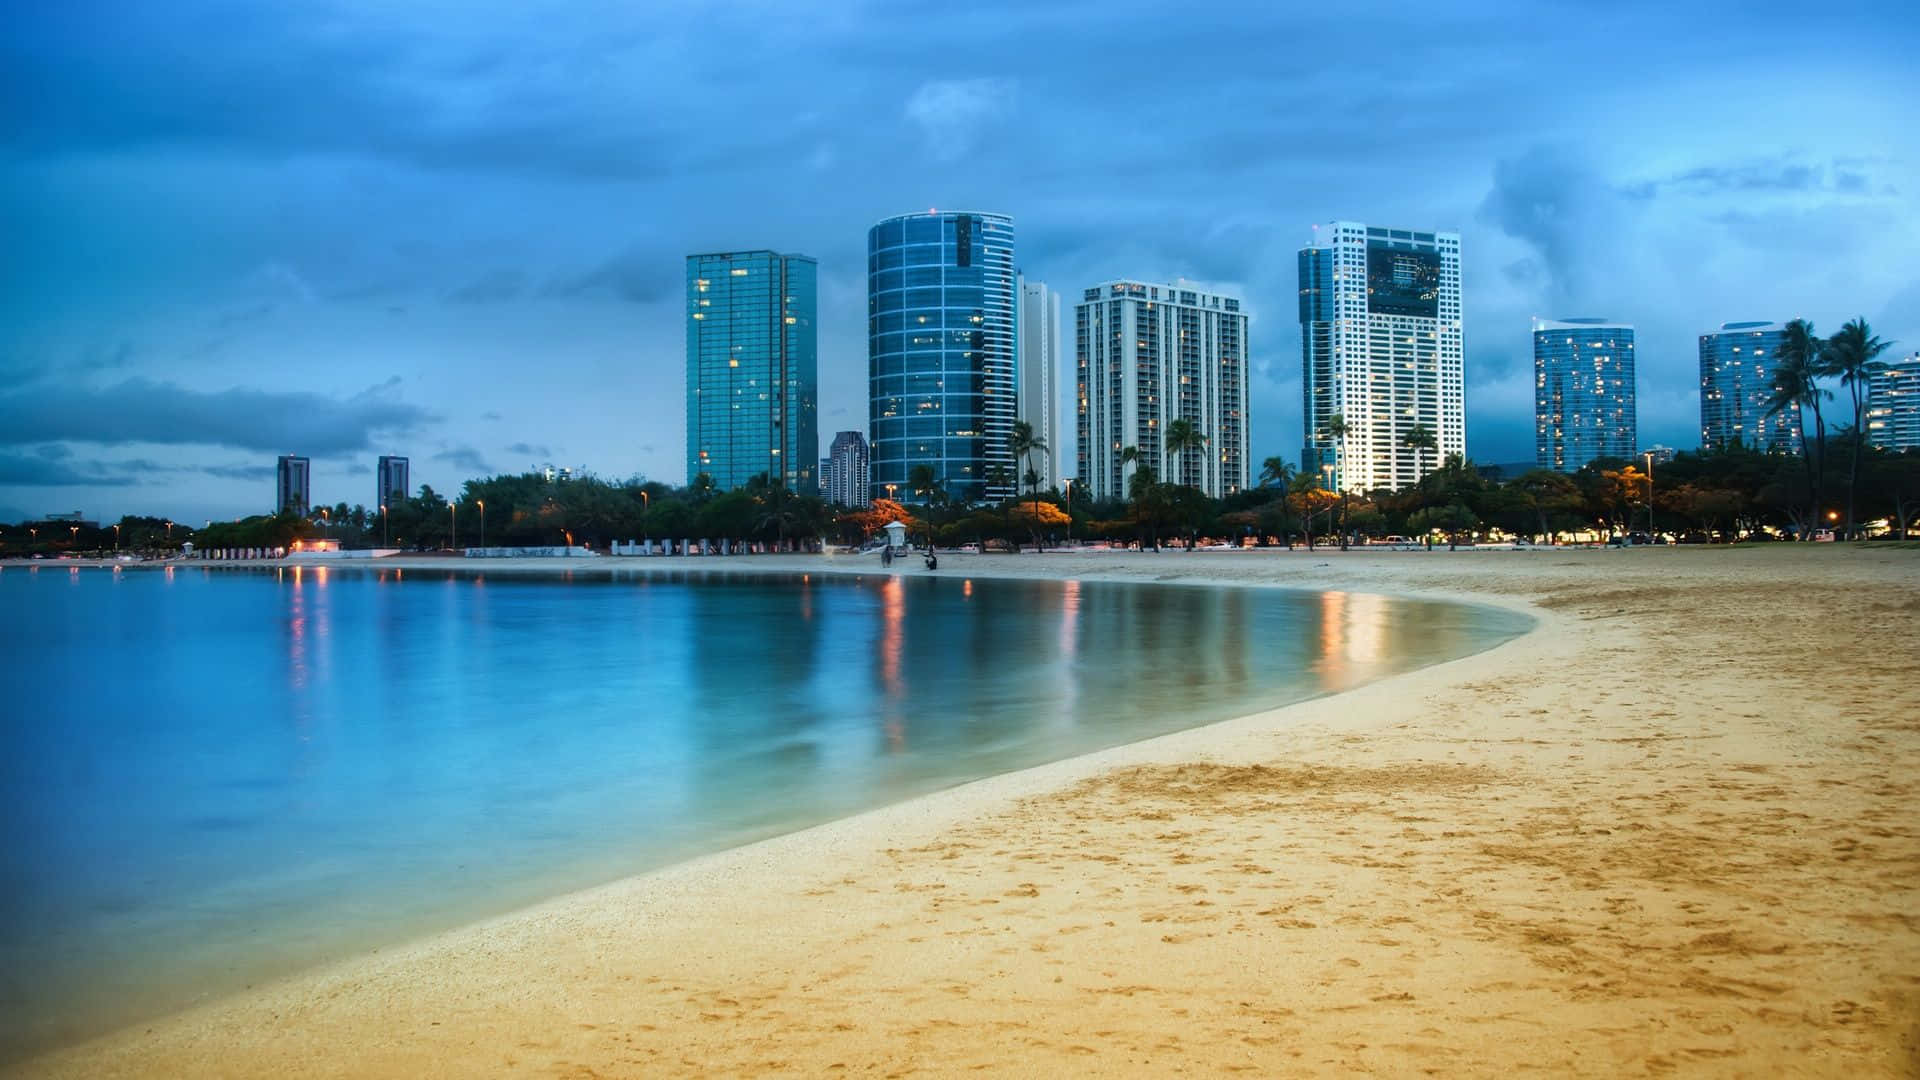 A Beach With Buildings And A Beach In The Distance Wallpaper